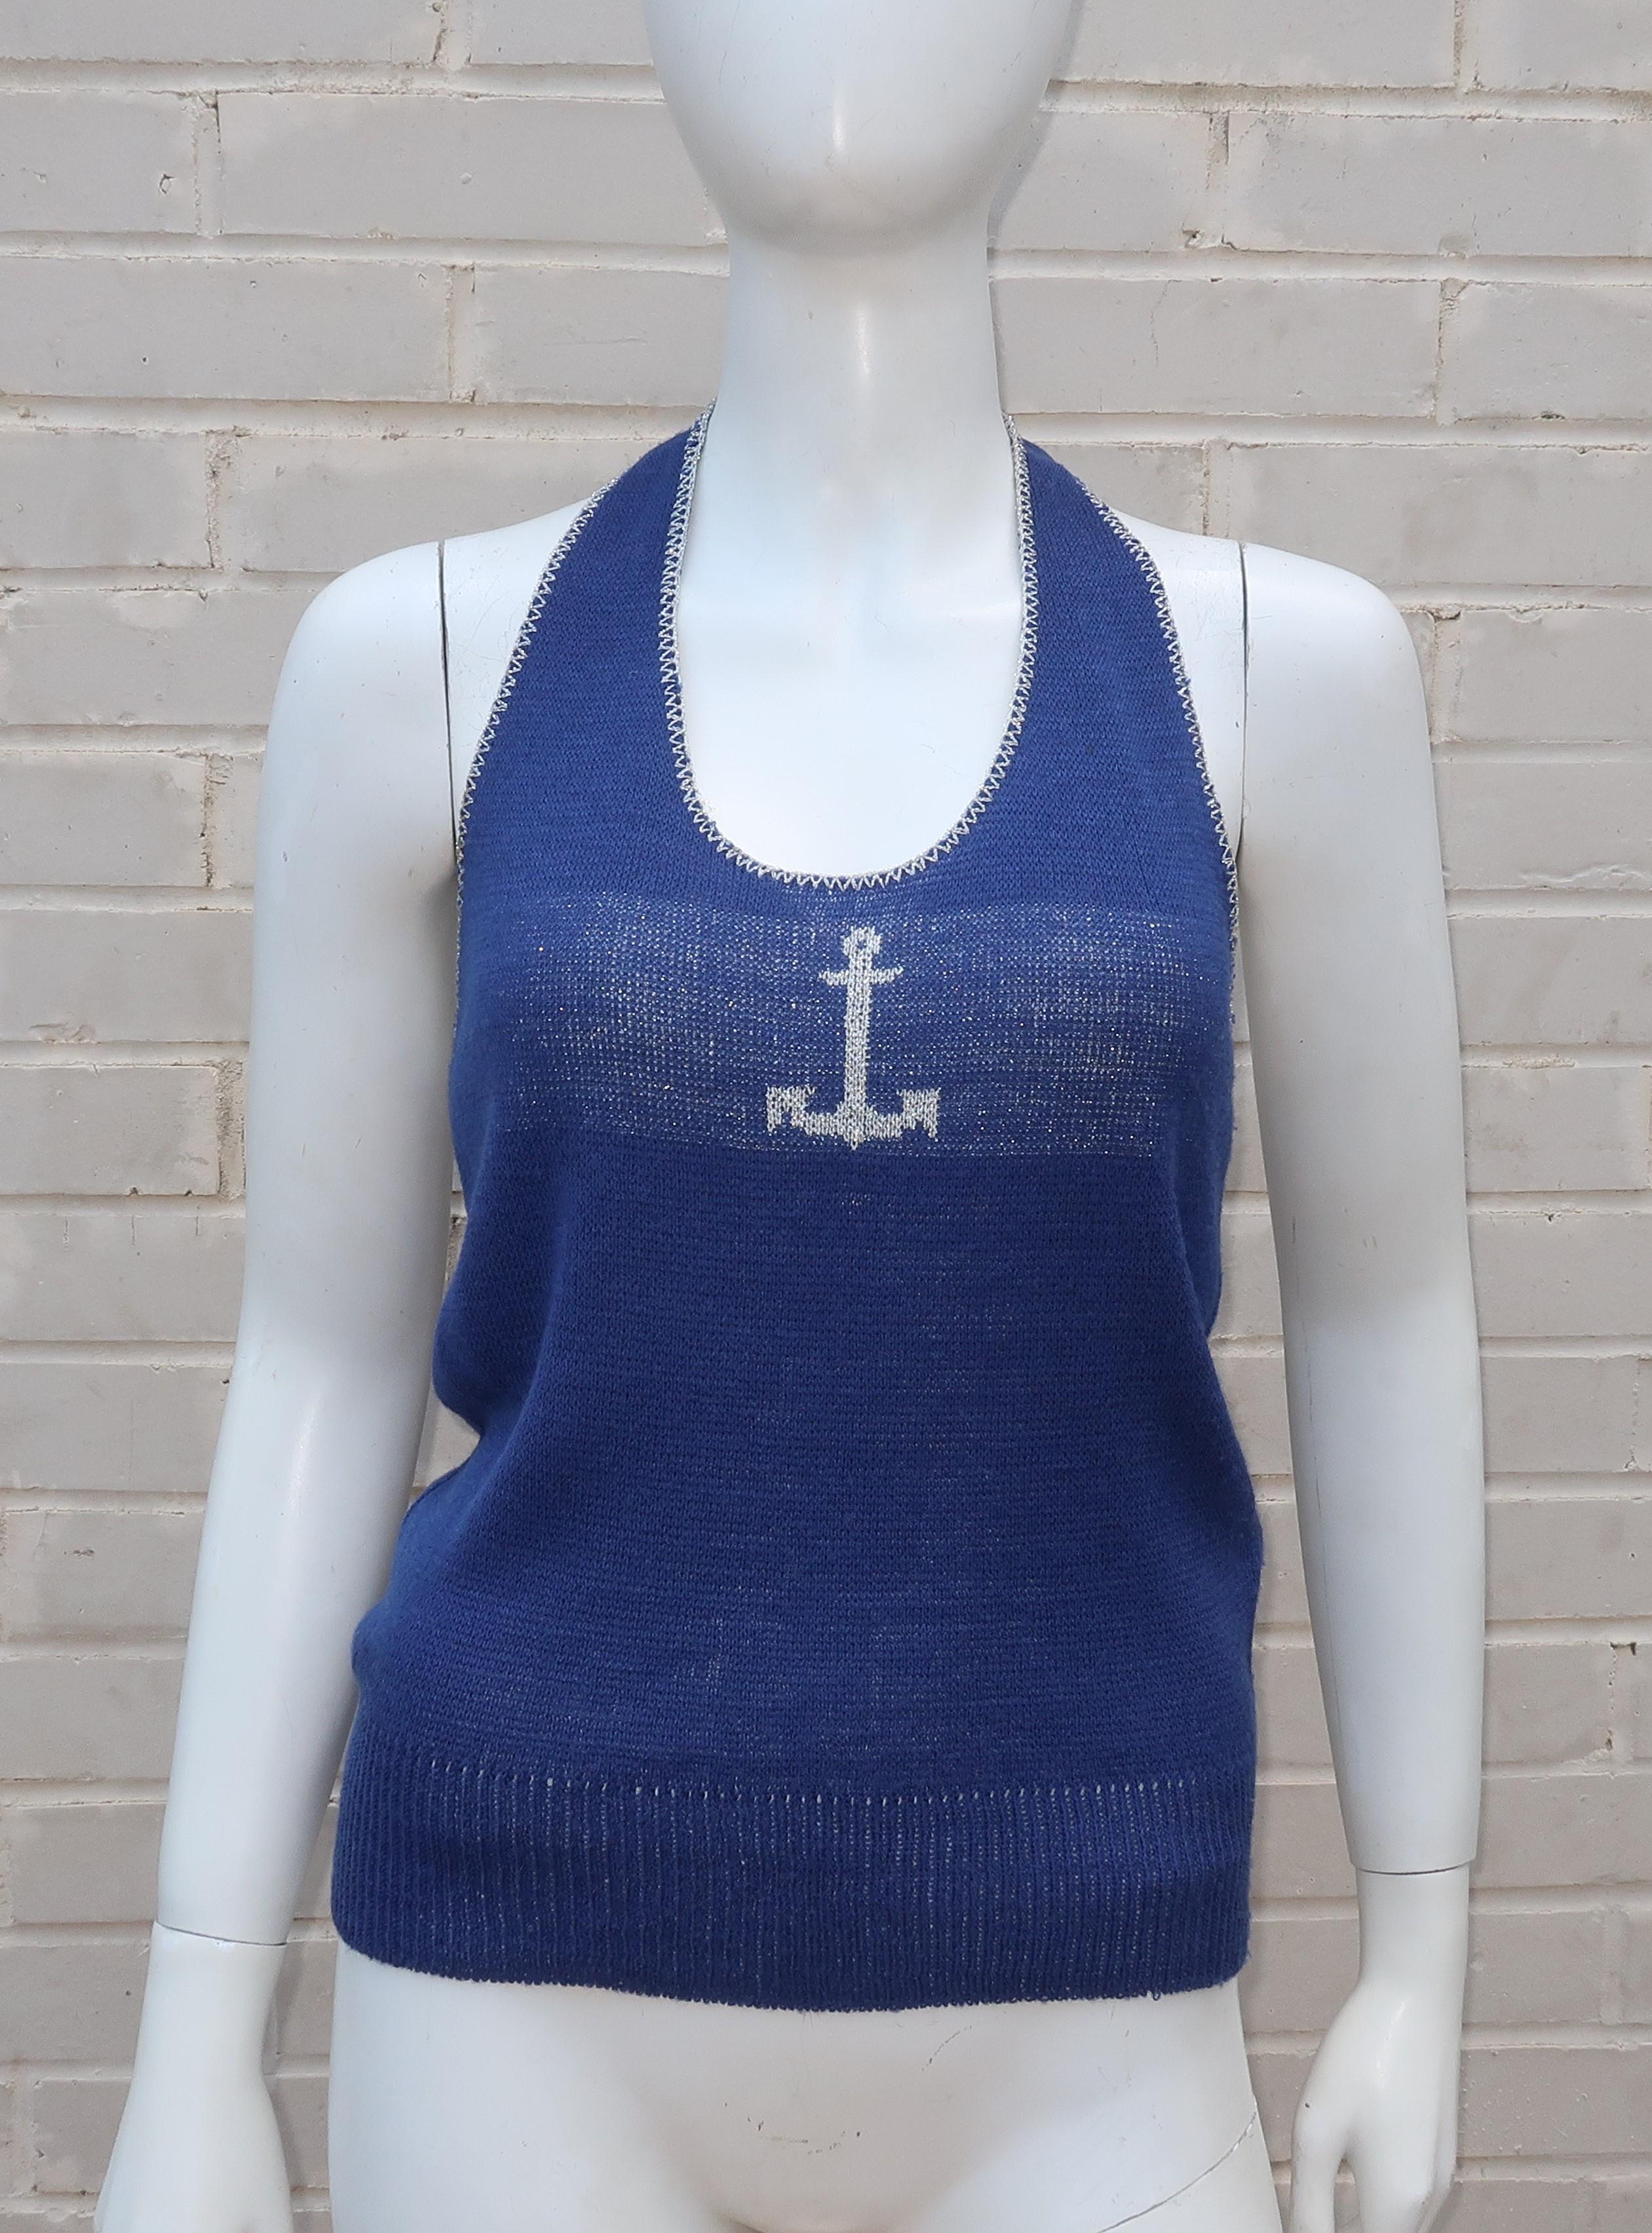 Ship ahoy and anchors away!  This 1970's halter top by Pandora is a period perfect pairing for summery white shorts and pants.  The blue acrylic knit is embellished with silver metallic threading at the neckline and across the bust with a decorative